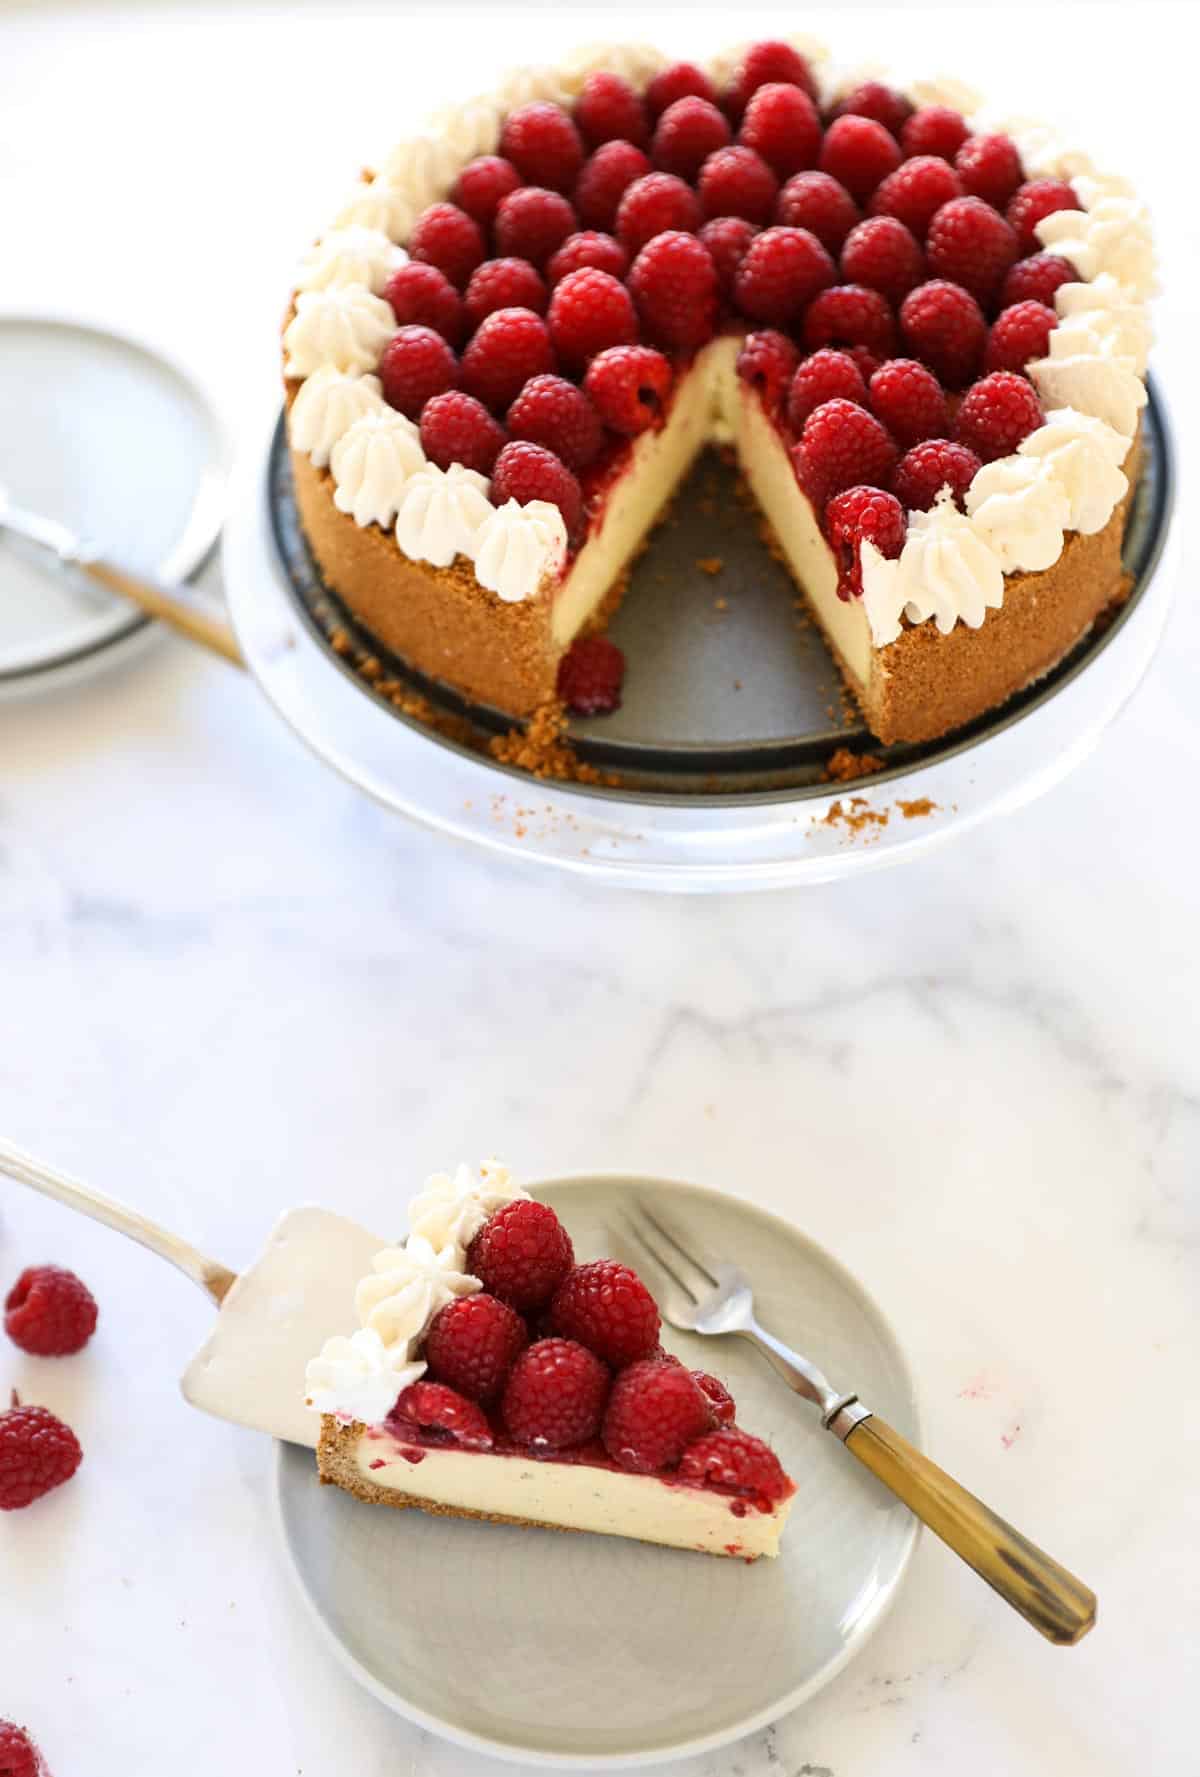 A whole raspberry cheesecake with a slice of cake on a plate with a fork